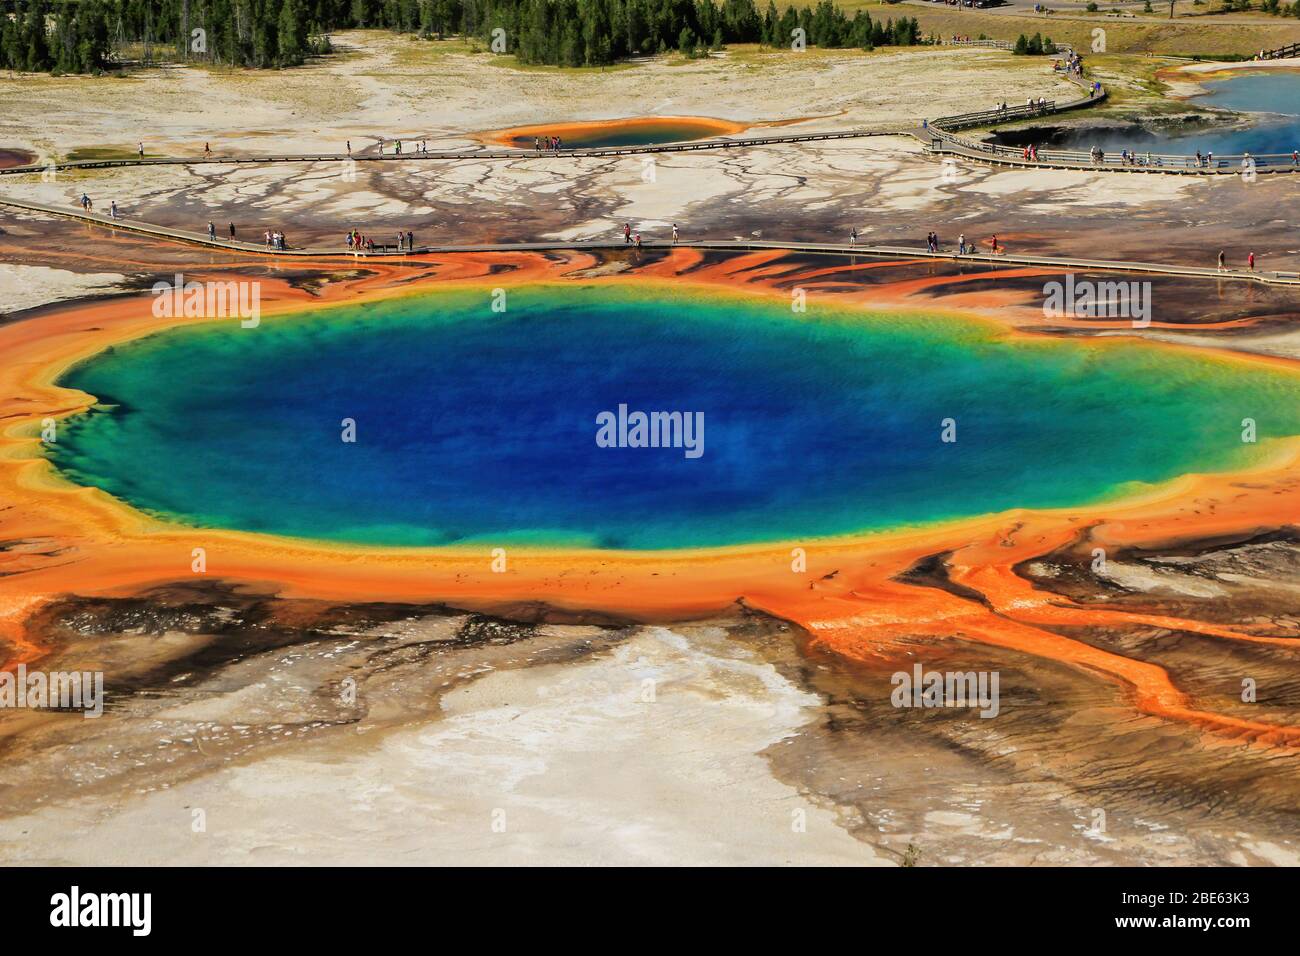 Aerial view of Grand Prismatic Spring in Midway Geyser Basin, Yellowstone National Park, Wyoming, USA. It is the largest hot spring in the United Stat Stock Photo